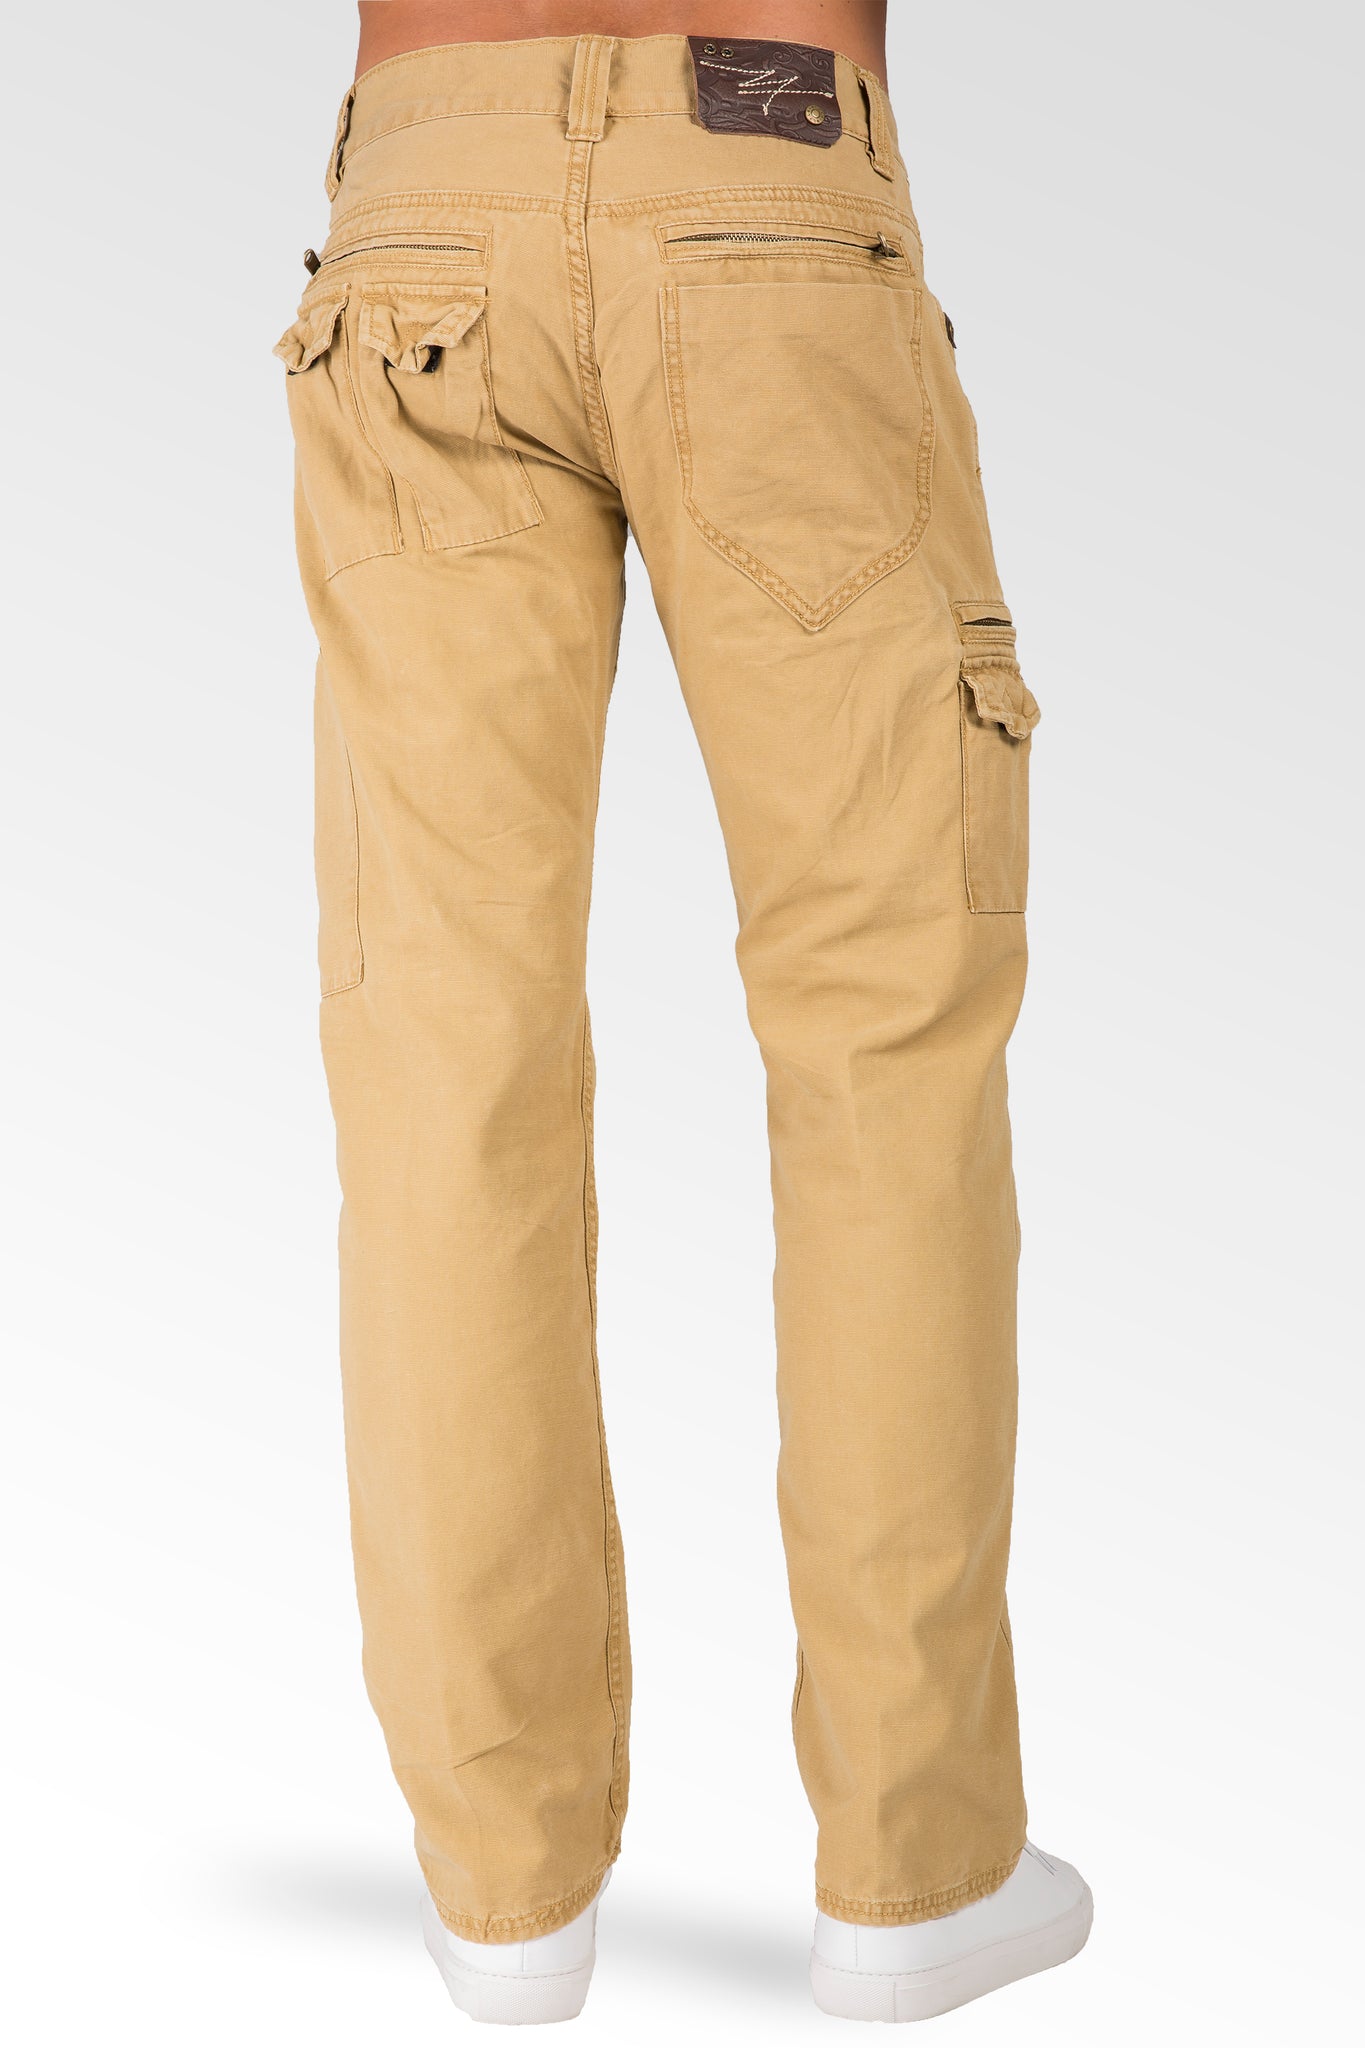 Relaxed Straight Tan Garment Washed Premium Canvas Utility Jeans Cargo Zipper Pockets